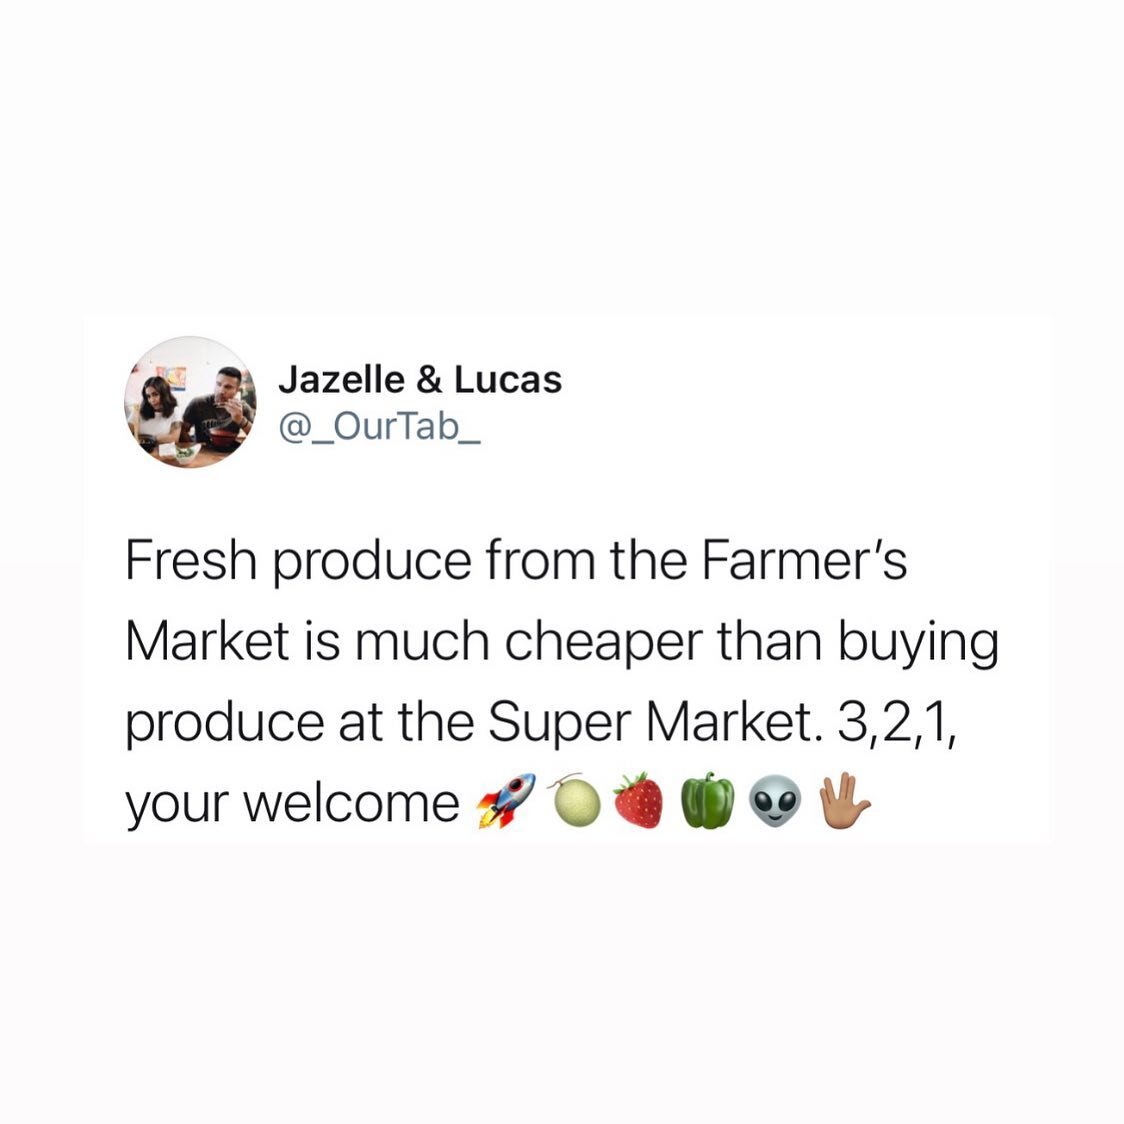 Just a friendly reminder | Support your local Farmer&rsquo;s Market 🌞 

- Our Tab 

🐦 @_OurTab_